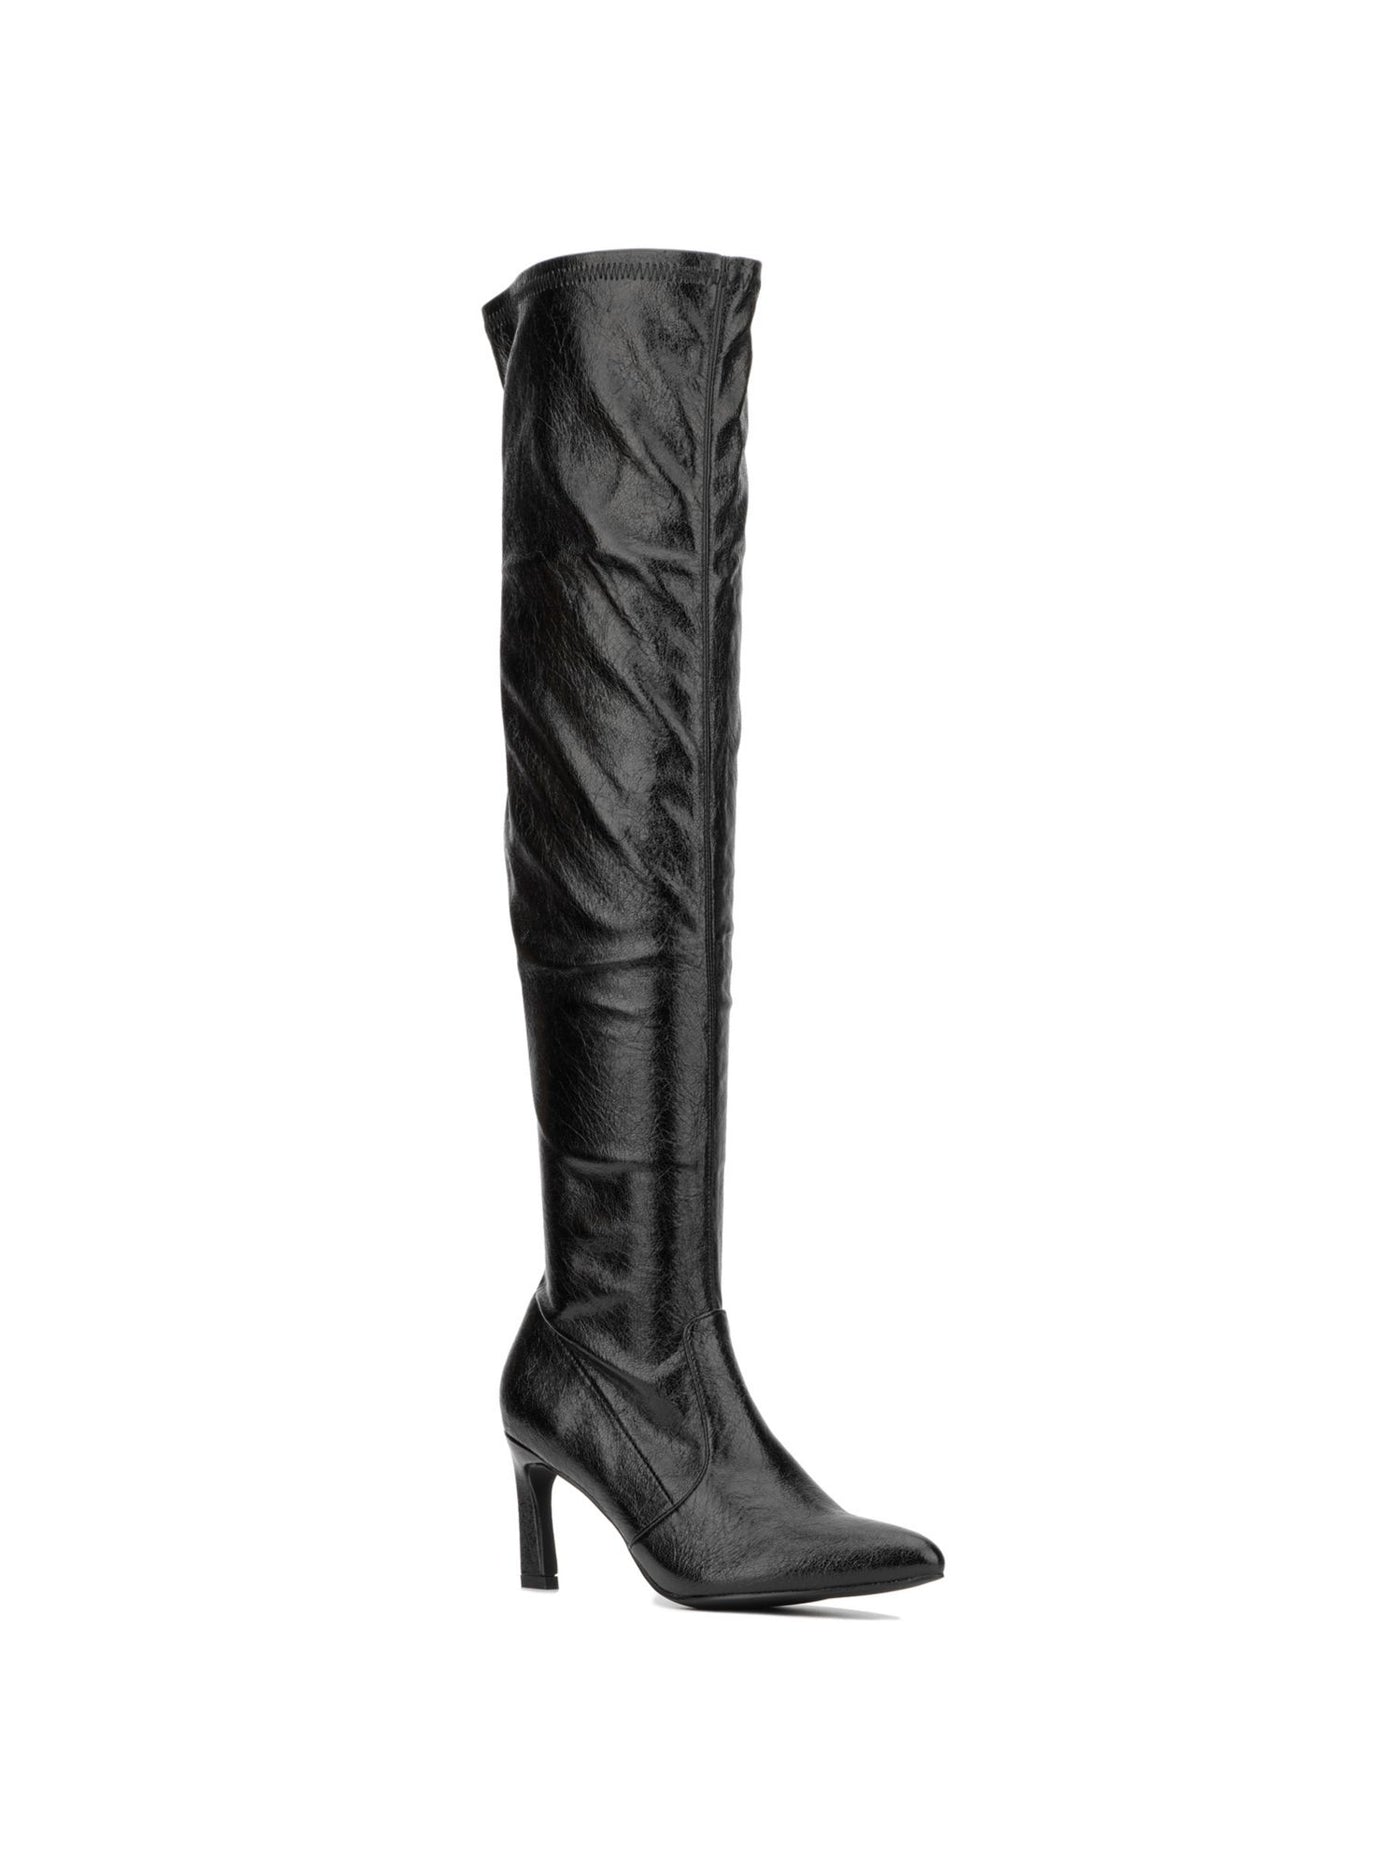 NEW YORK & CO Womens Black Padded Xiena Pointed Toe Stiletto Zip-Up Heeled Boots 7